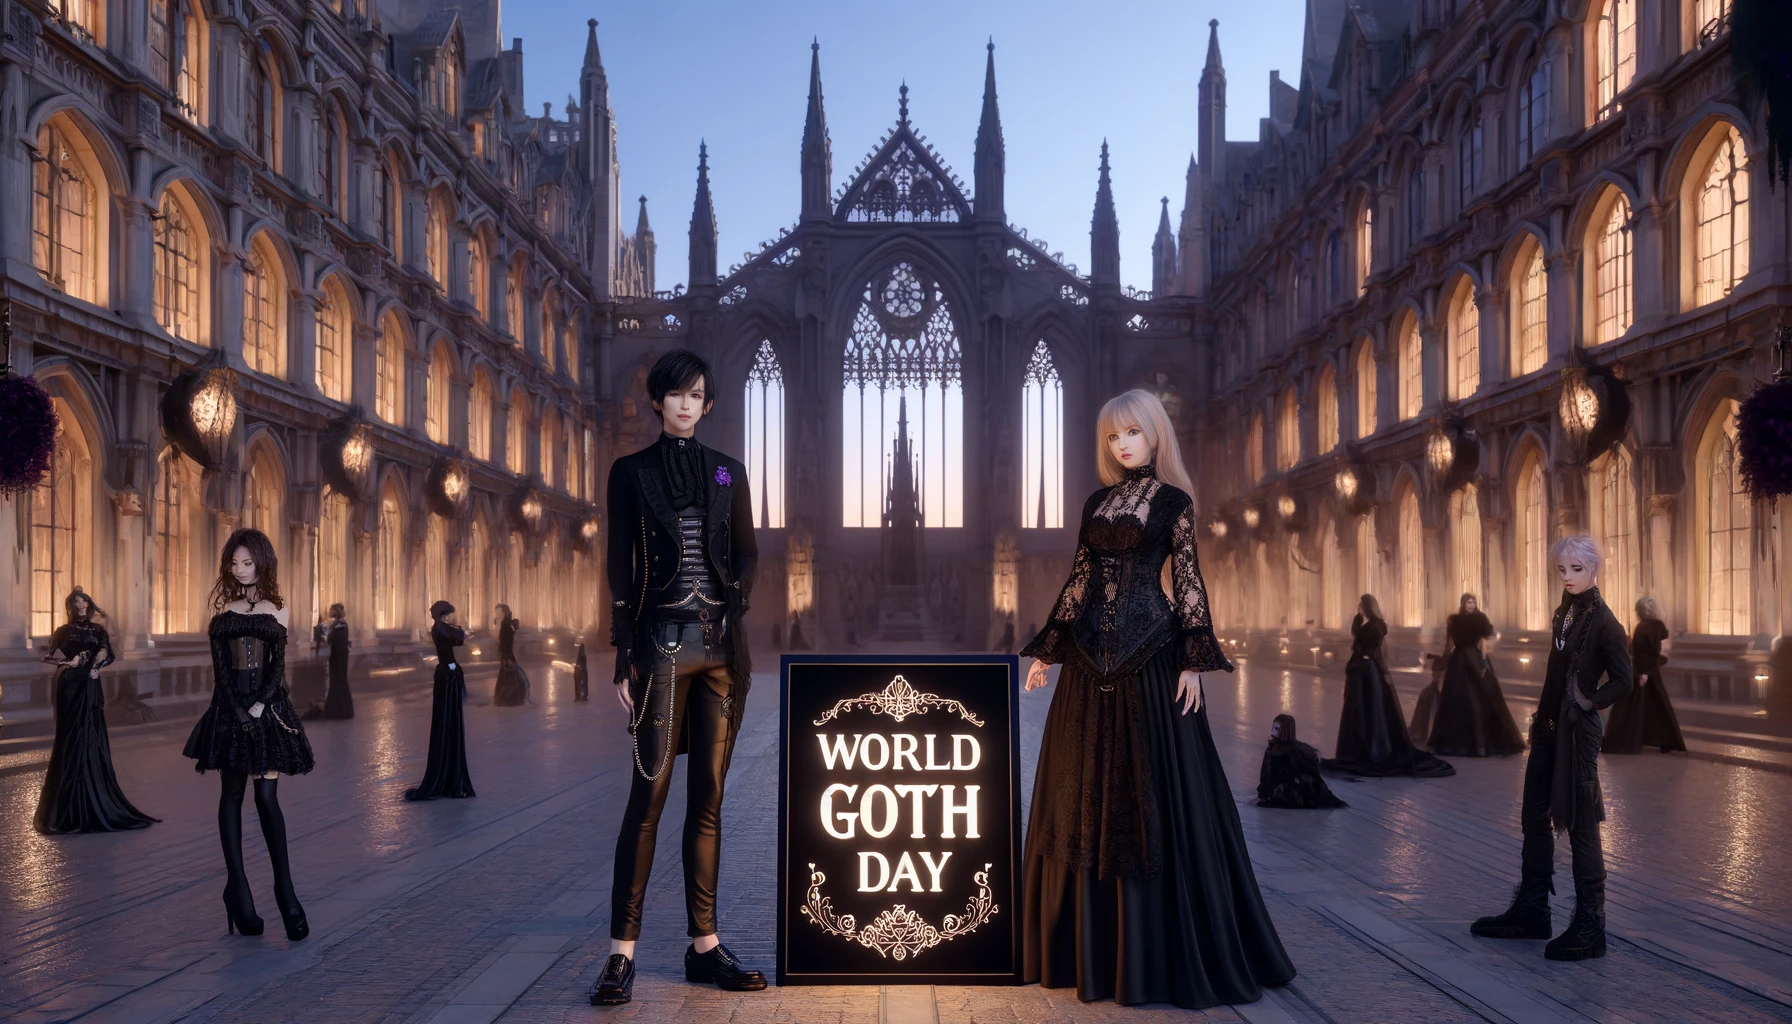 Unique World Goth Day Wishes for Social Media